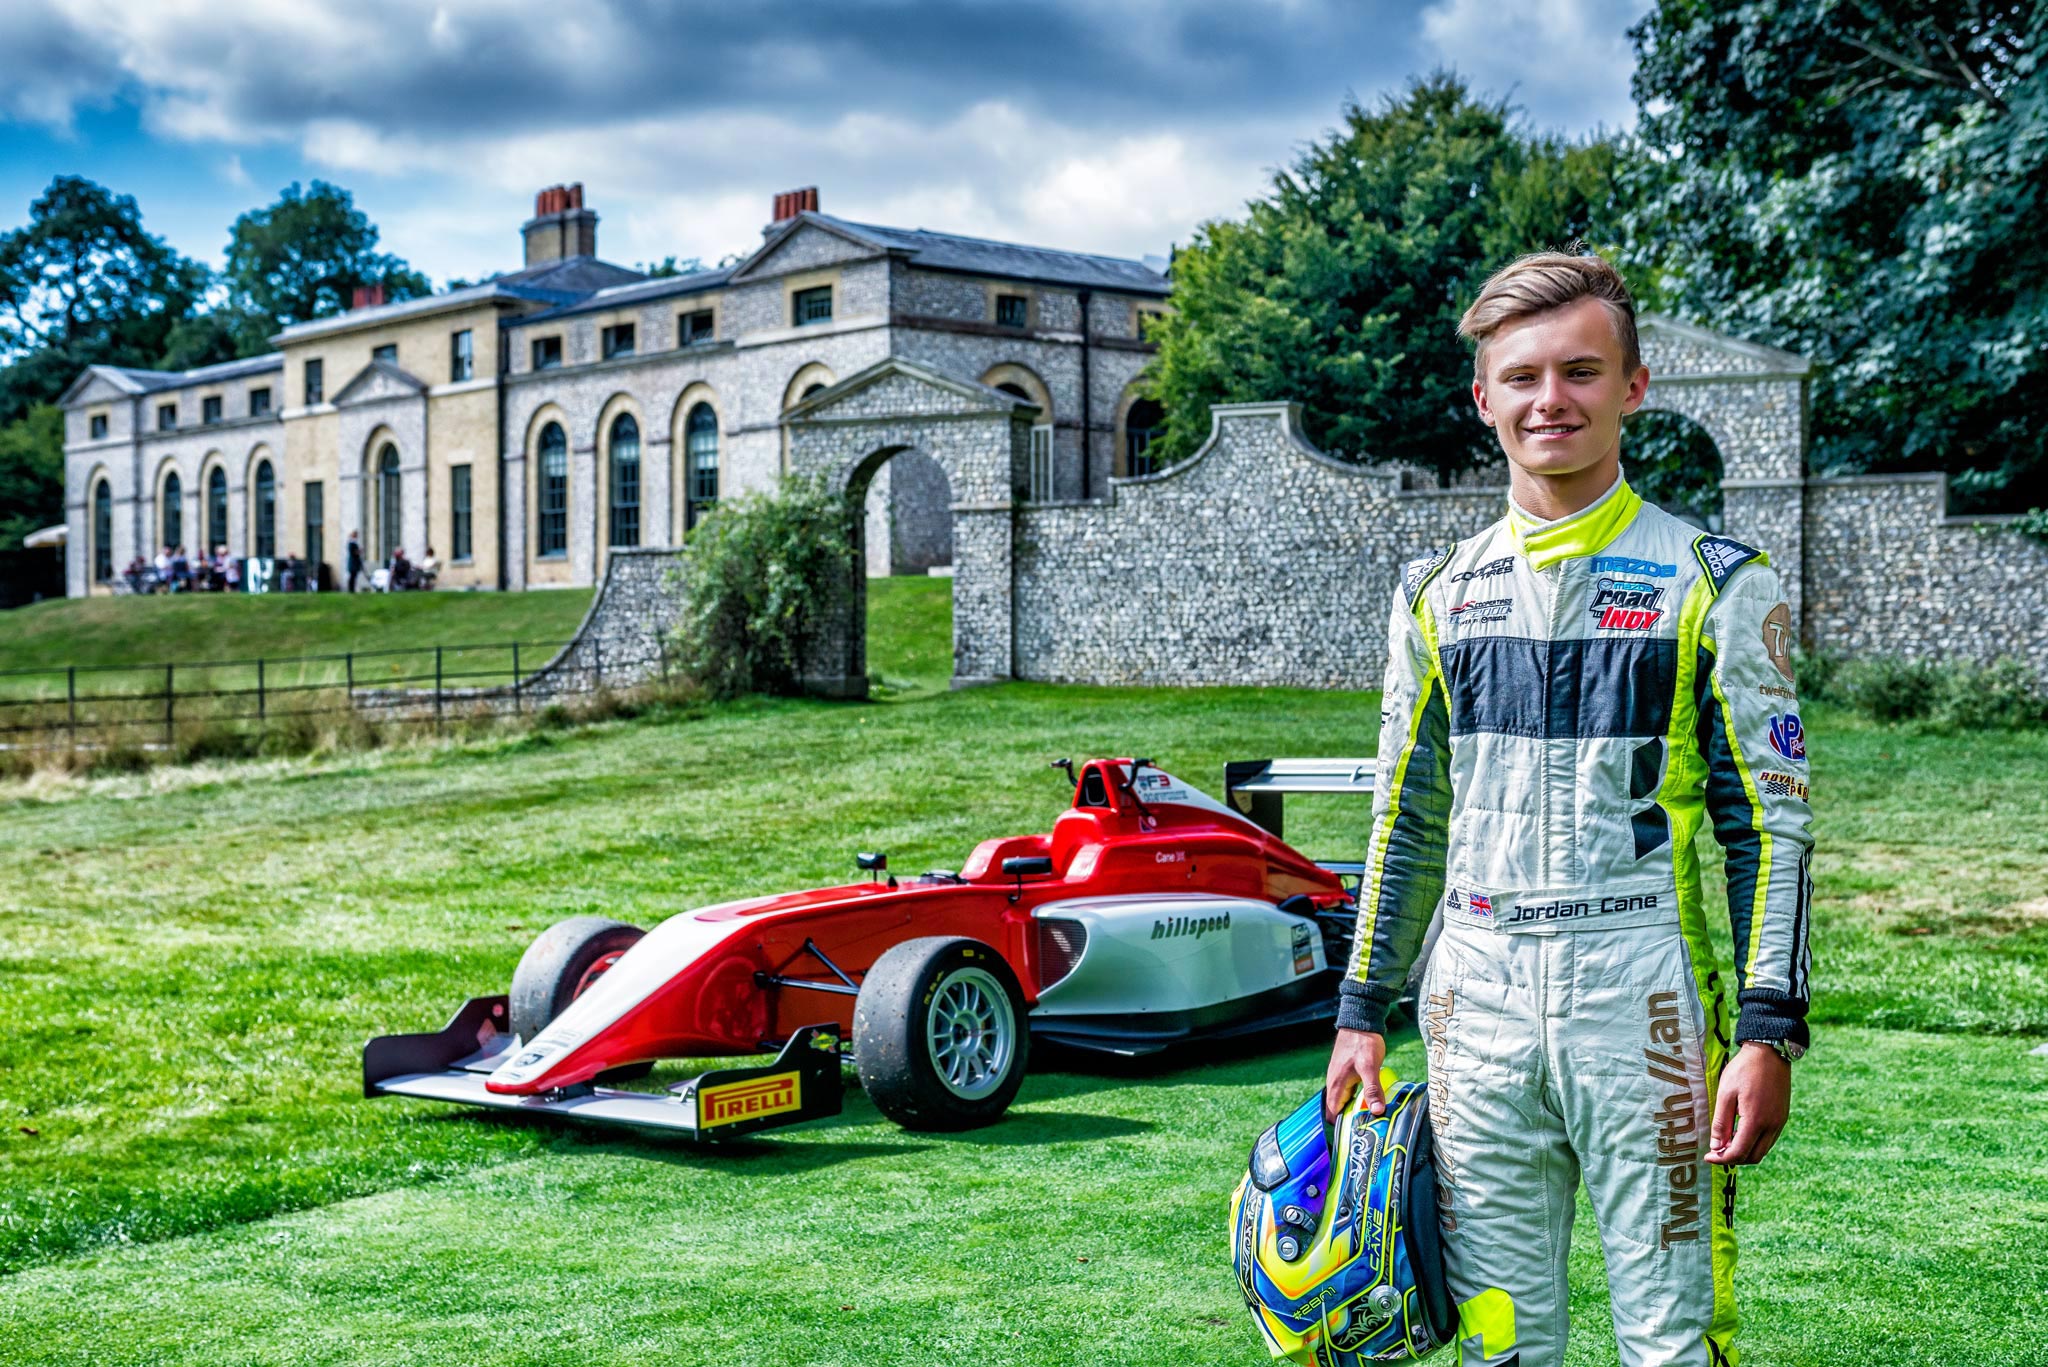 A dynamic shot of a young race driver standing proudly in front of his Formula race car, helmet in hand, ready for action on the track. This aspiring talent embodies determination and passion for motorsport, expertly captured by Wright Content, your trusted sports photographer.